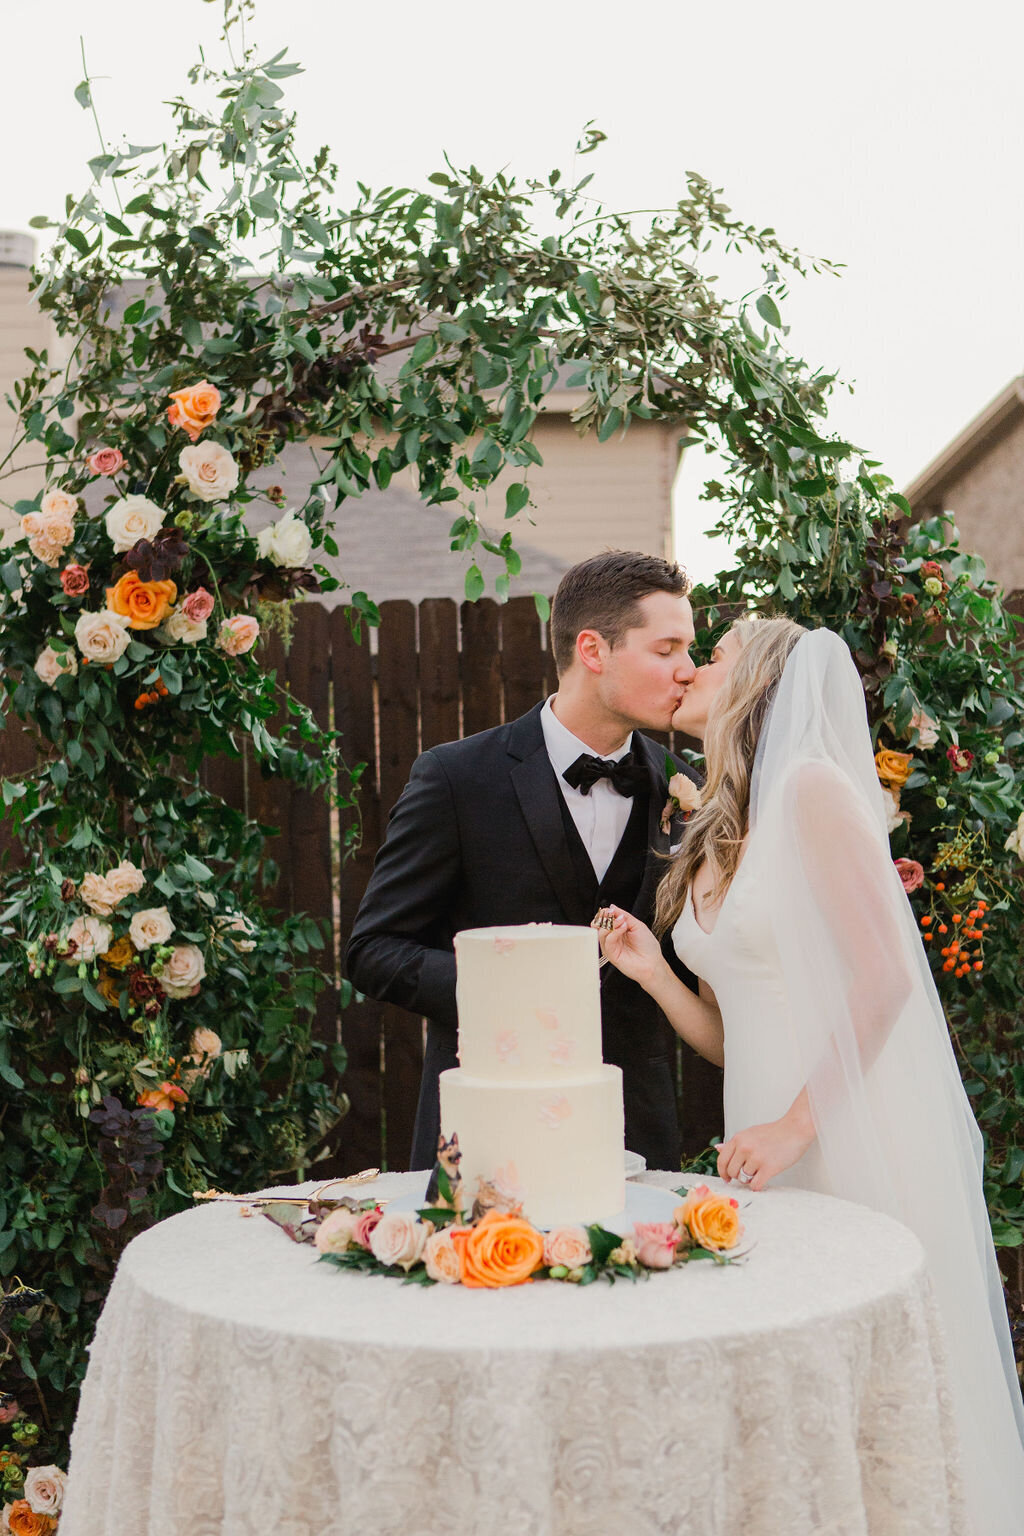 Cake Cutting at Intimate Ceremony in Dallas Forth Worth, Texas with Floral Arch by Vella Nest Floral Design